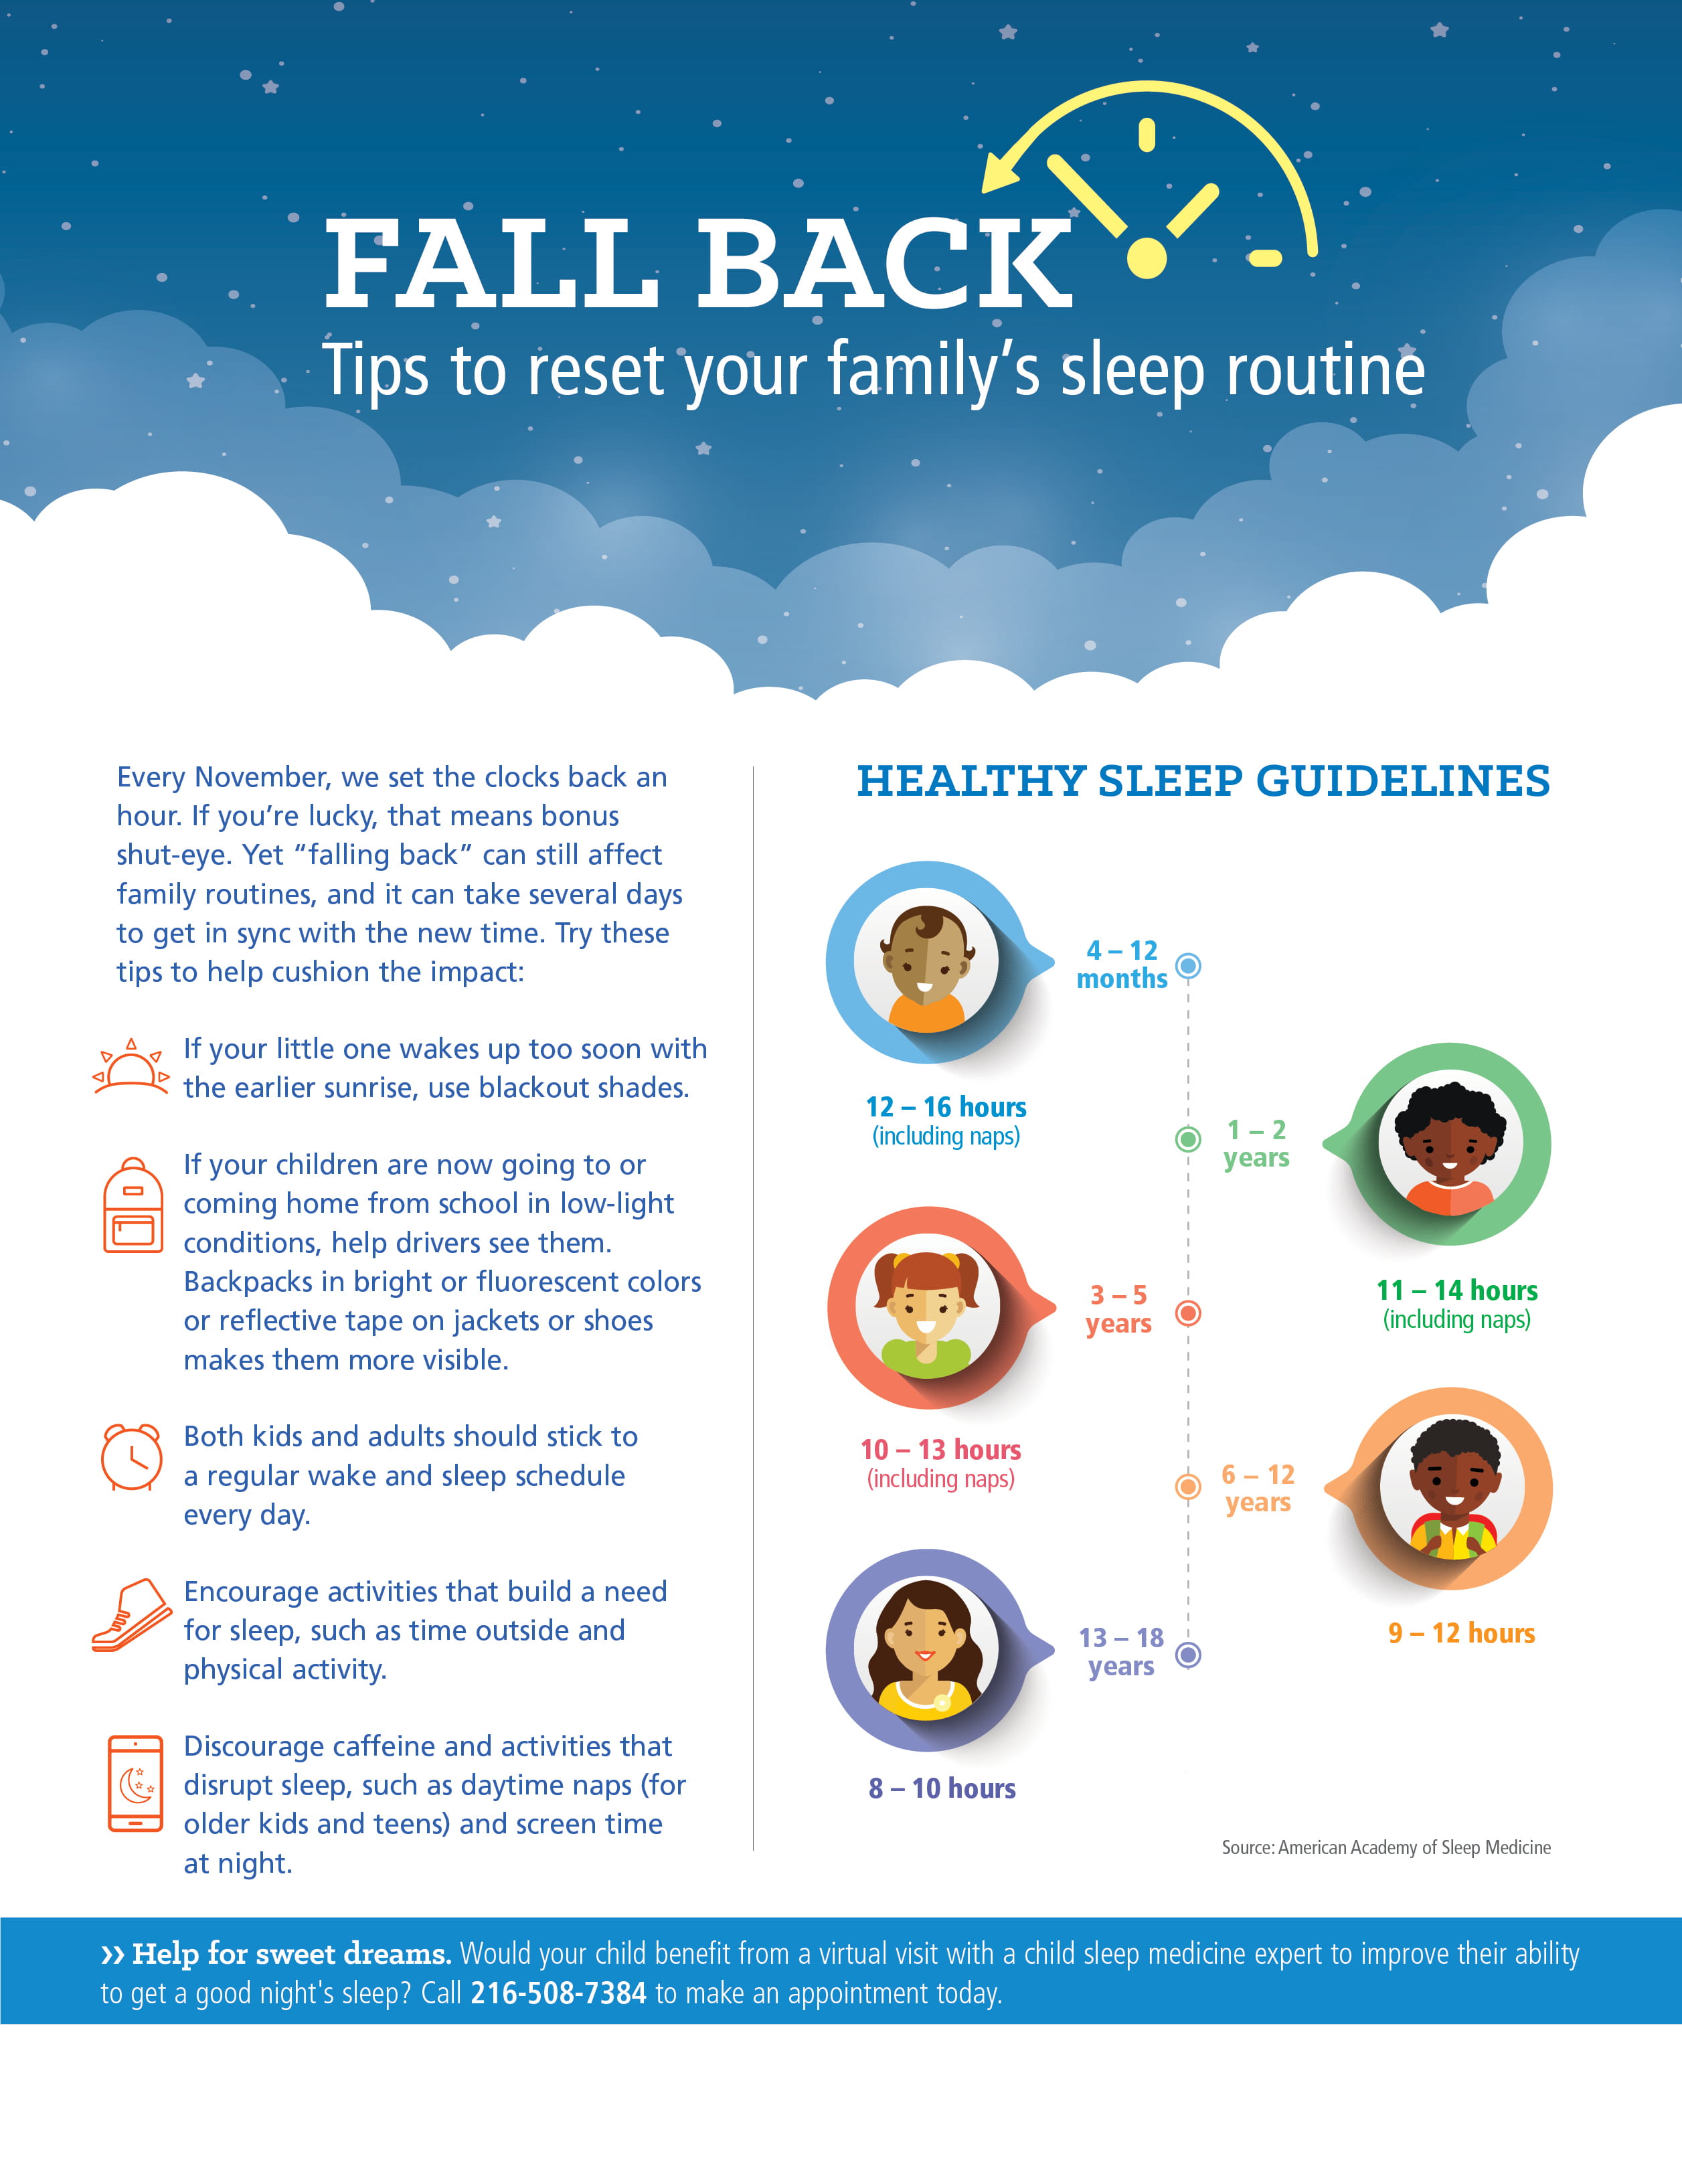 Tips to reset your family's sleep routine infographic